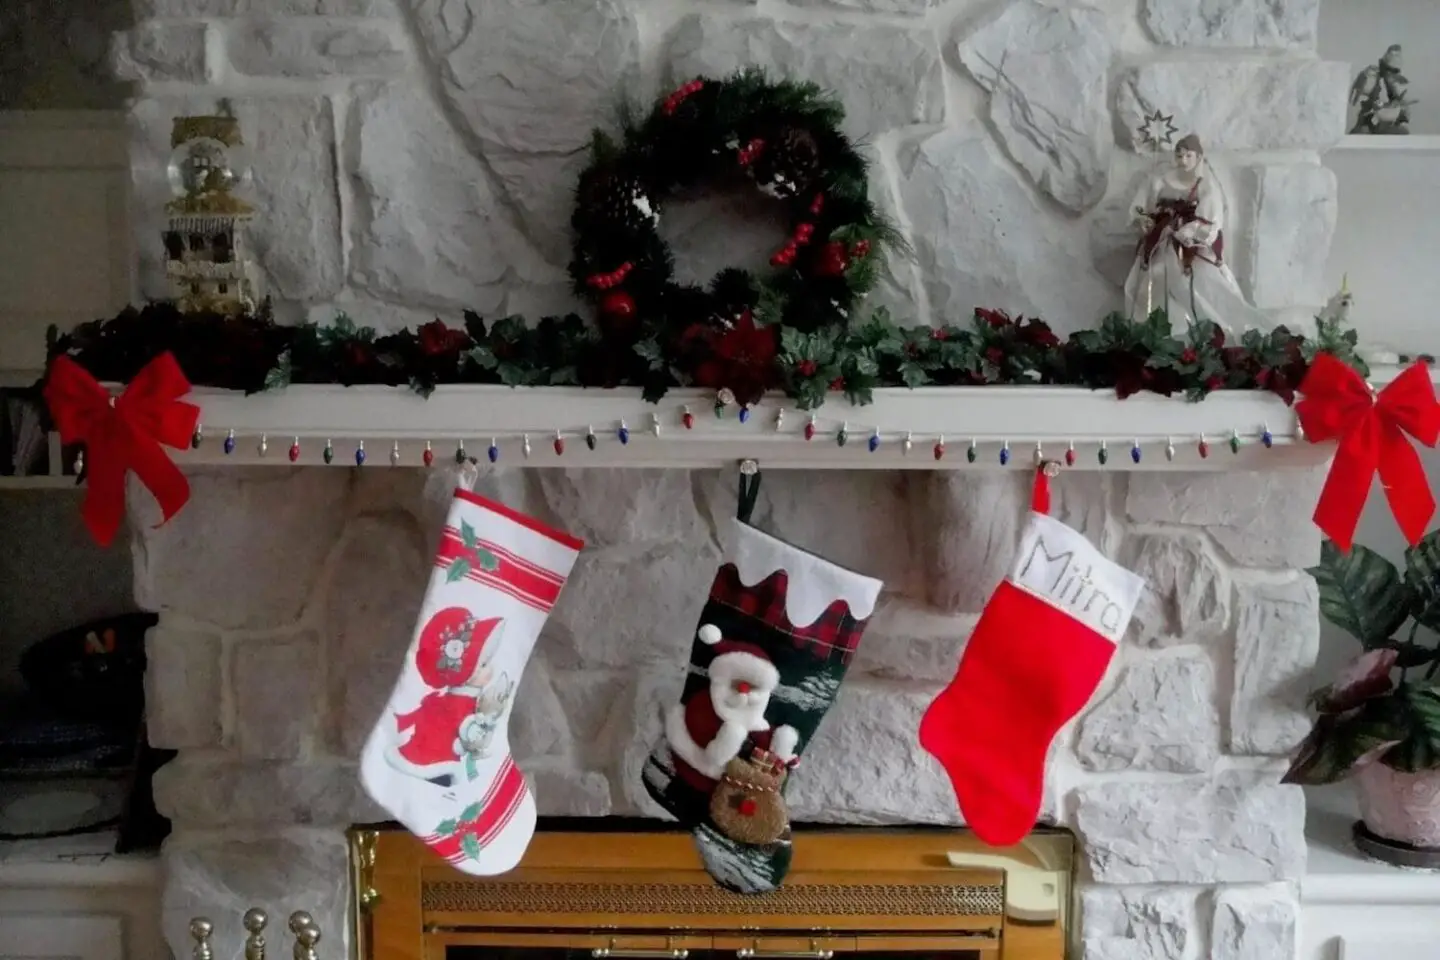 3 stockings hanging on a mantle piece, with a Christmas wreath above